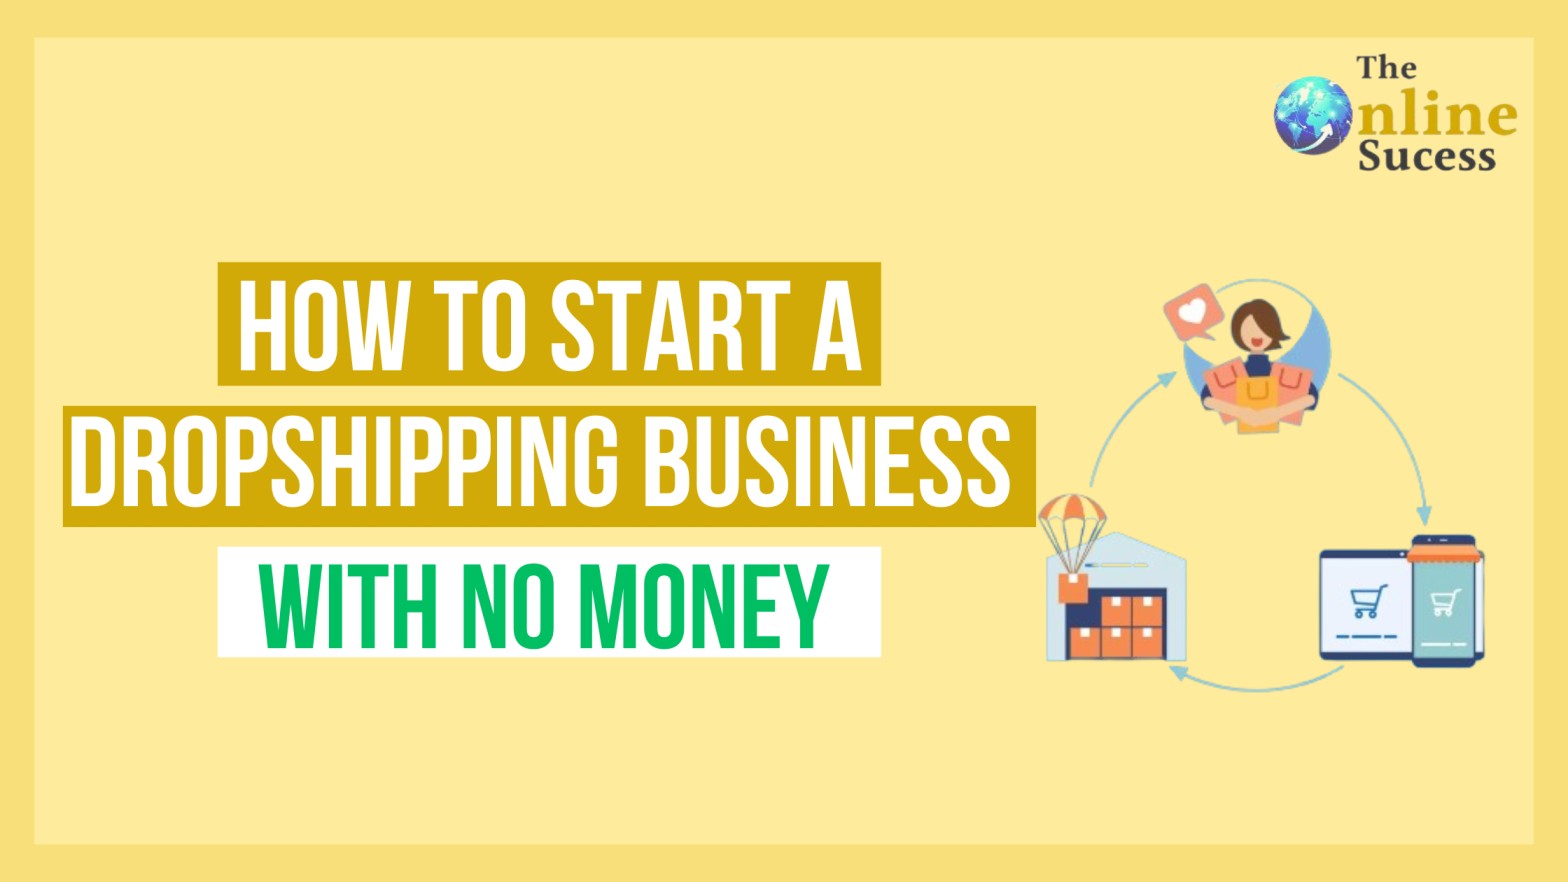 How To Start a Dropshipping Business With No Money